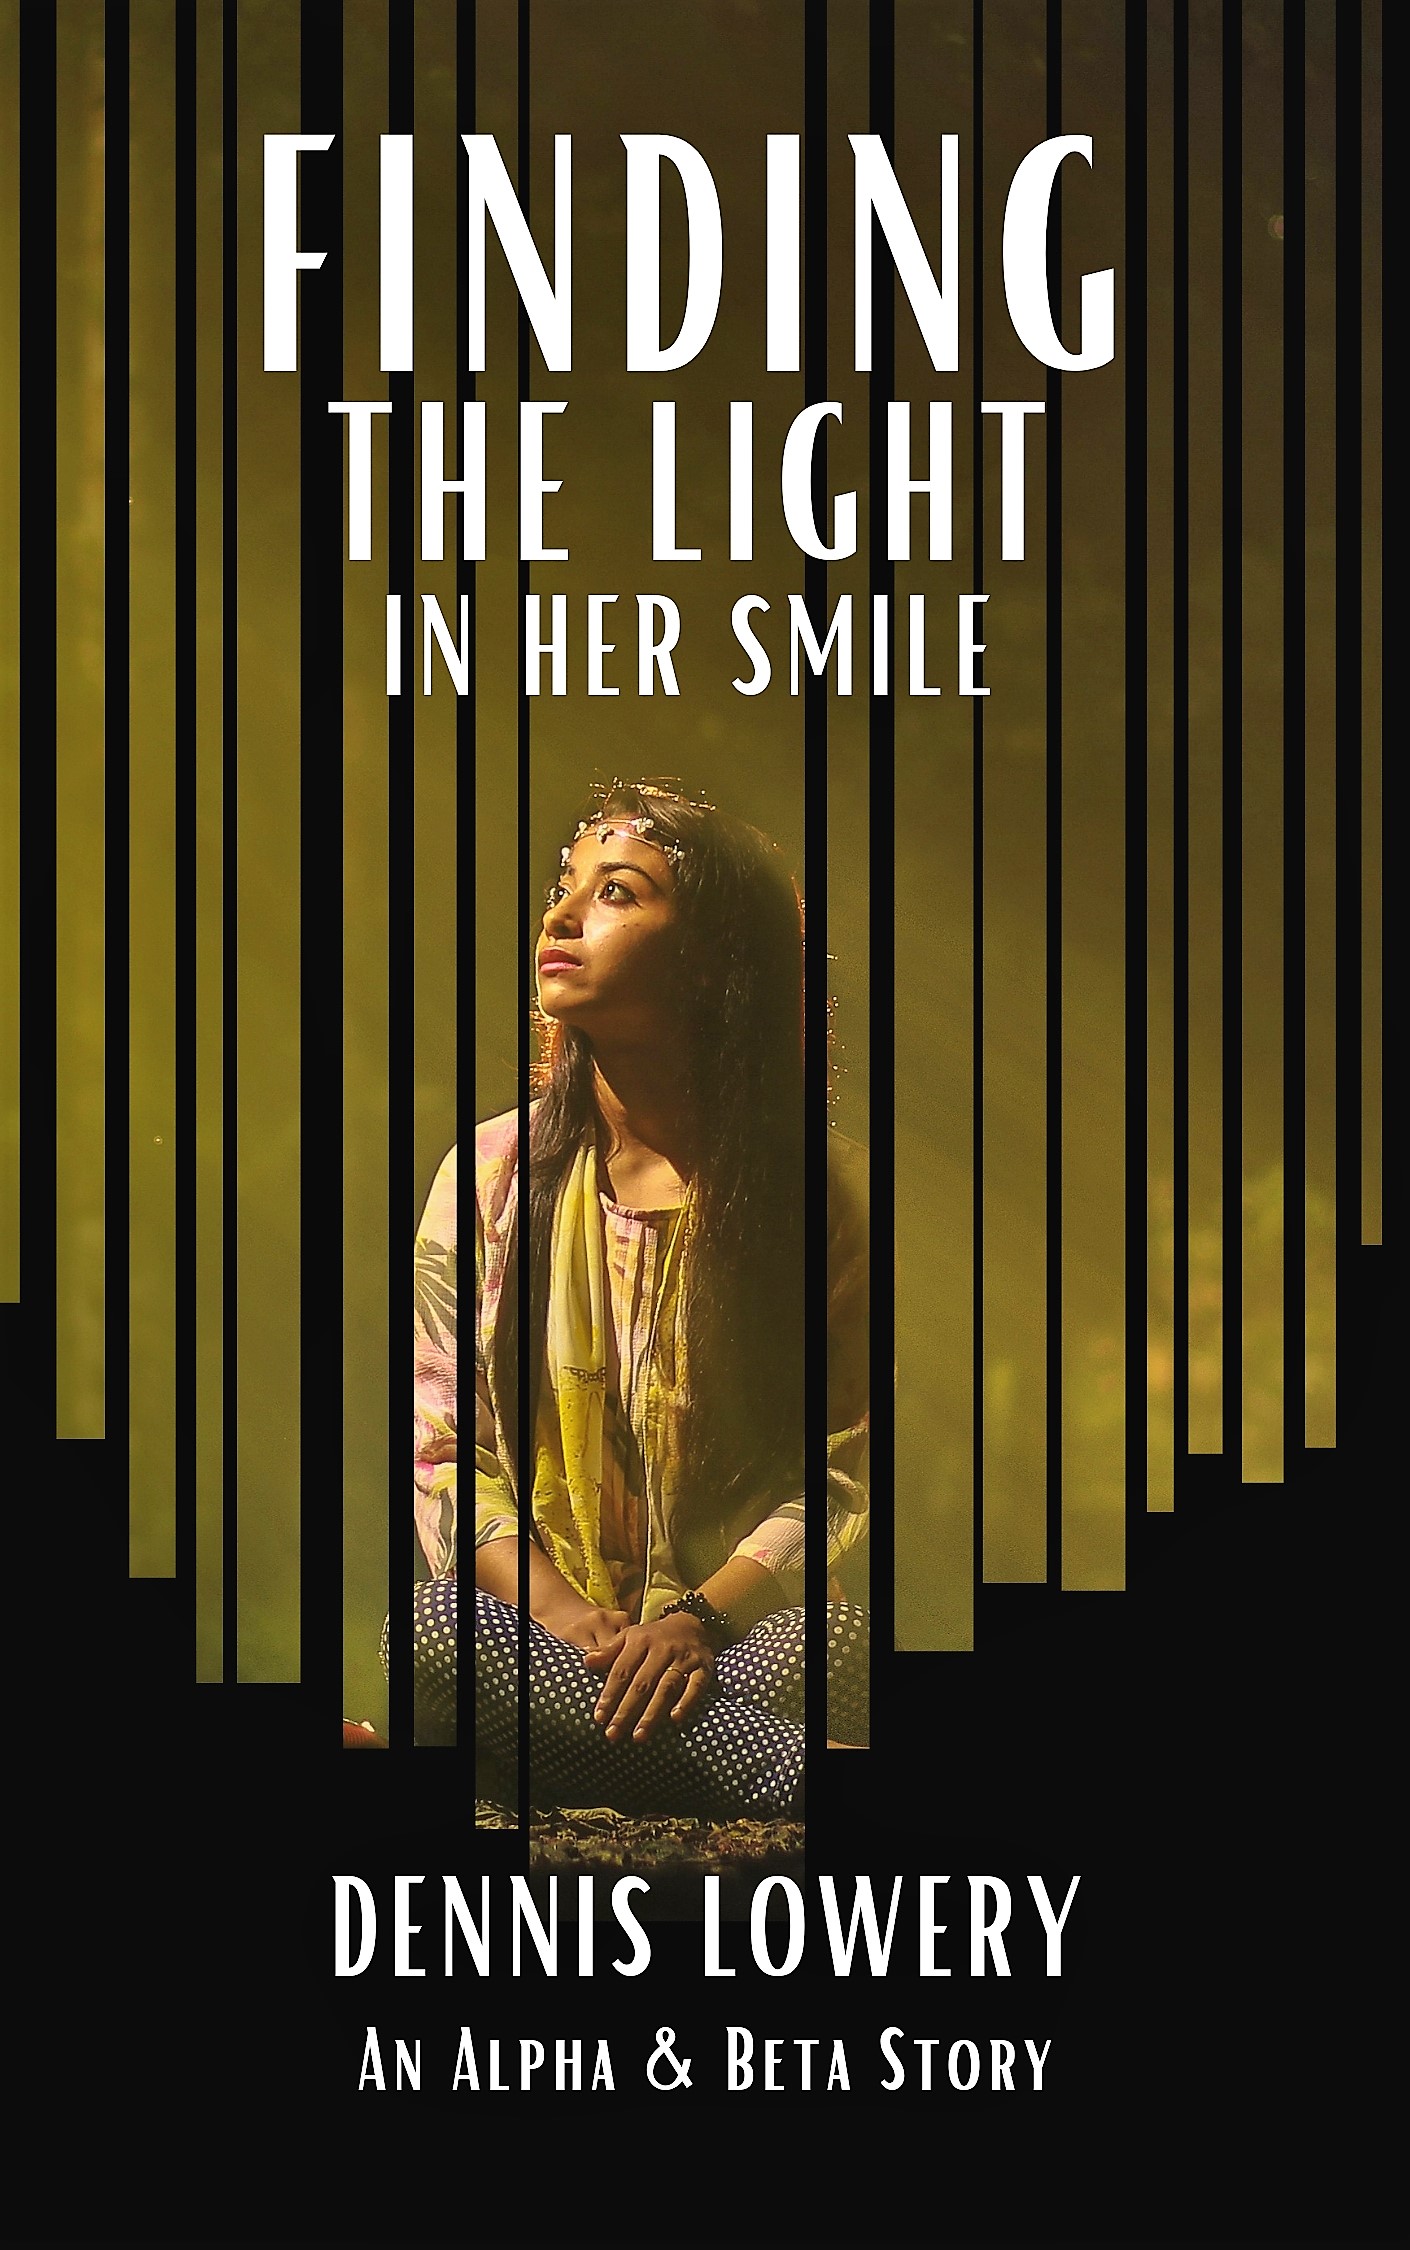 FINDING THE LIGHT IN HER SMILE by Dennis Lowery